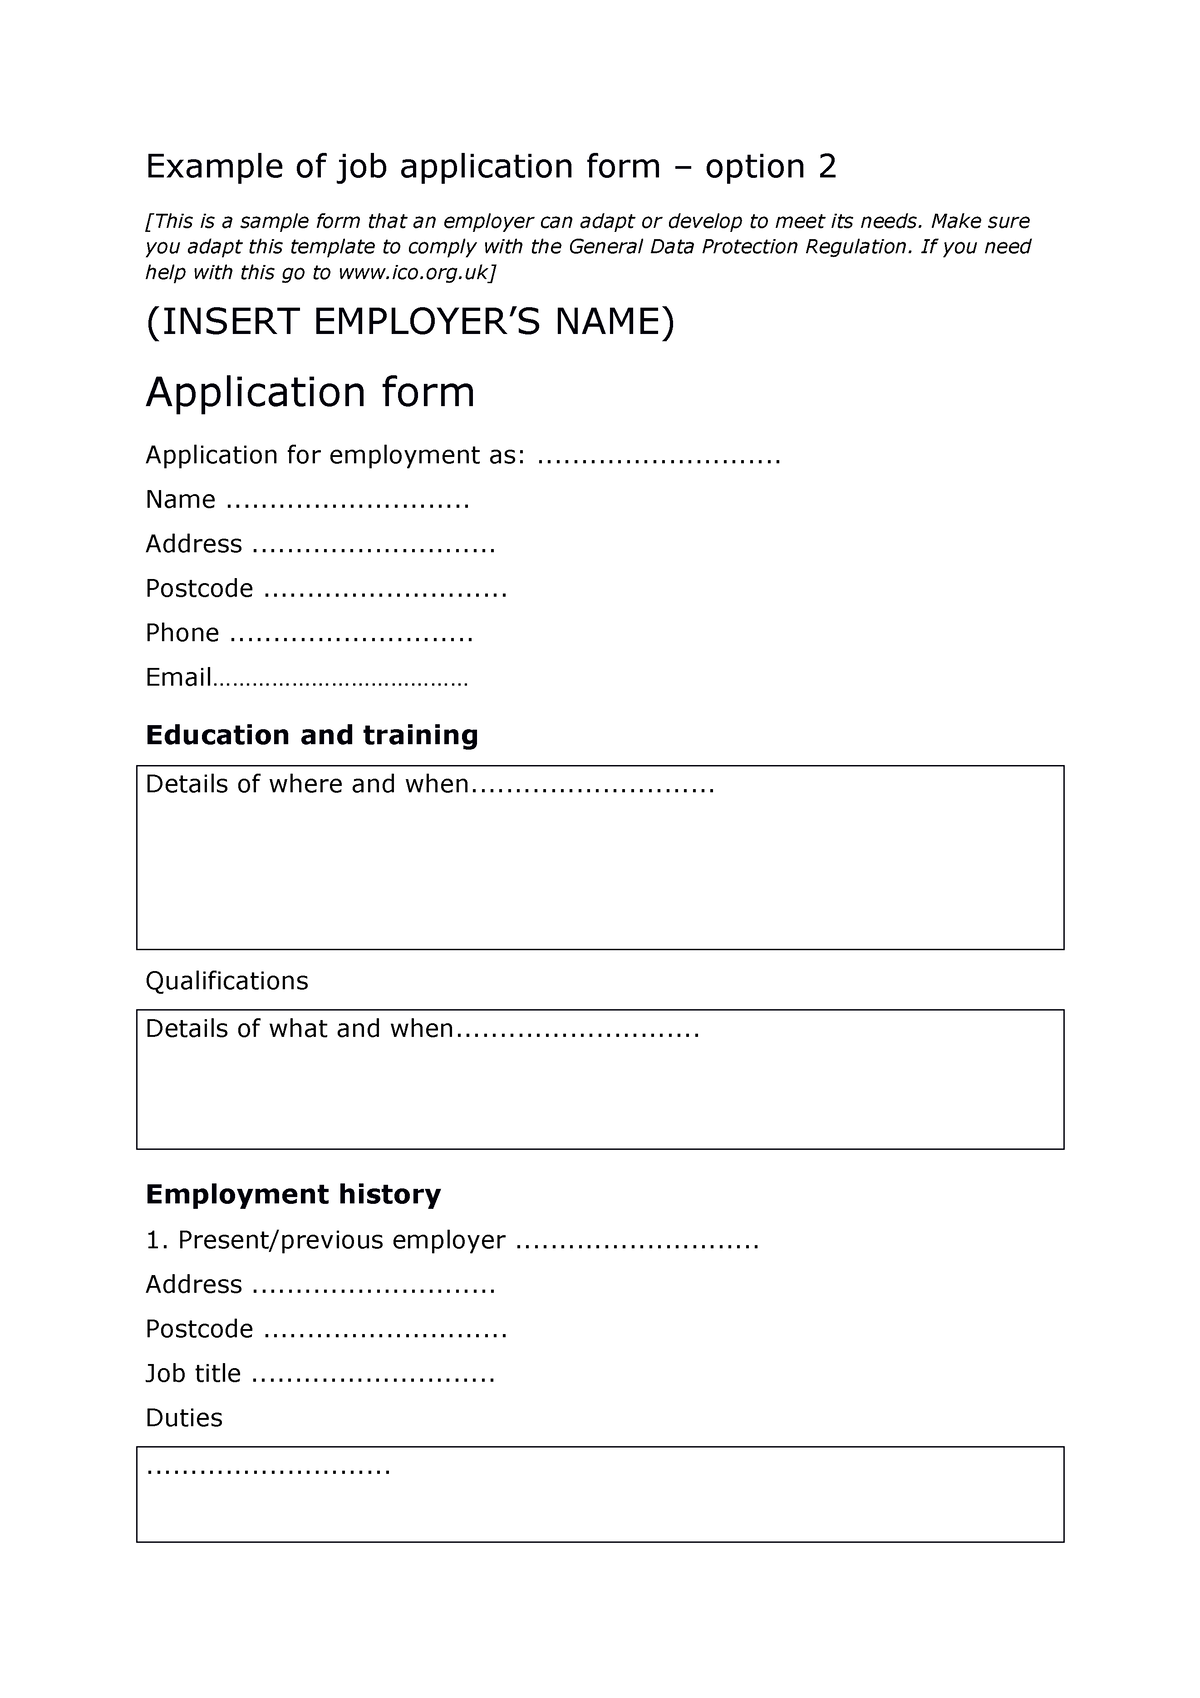 Job-application-form - simple template - Example of job application ...